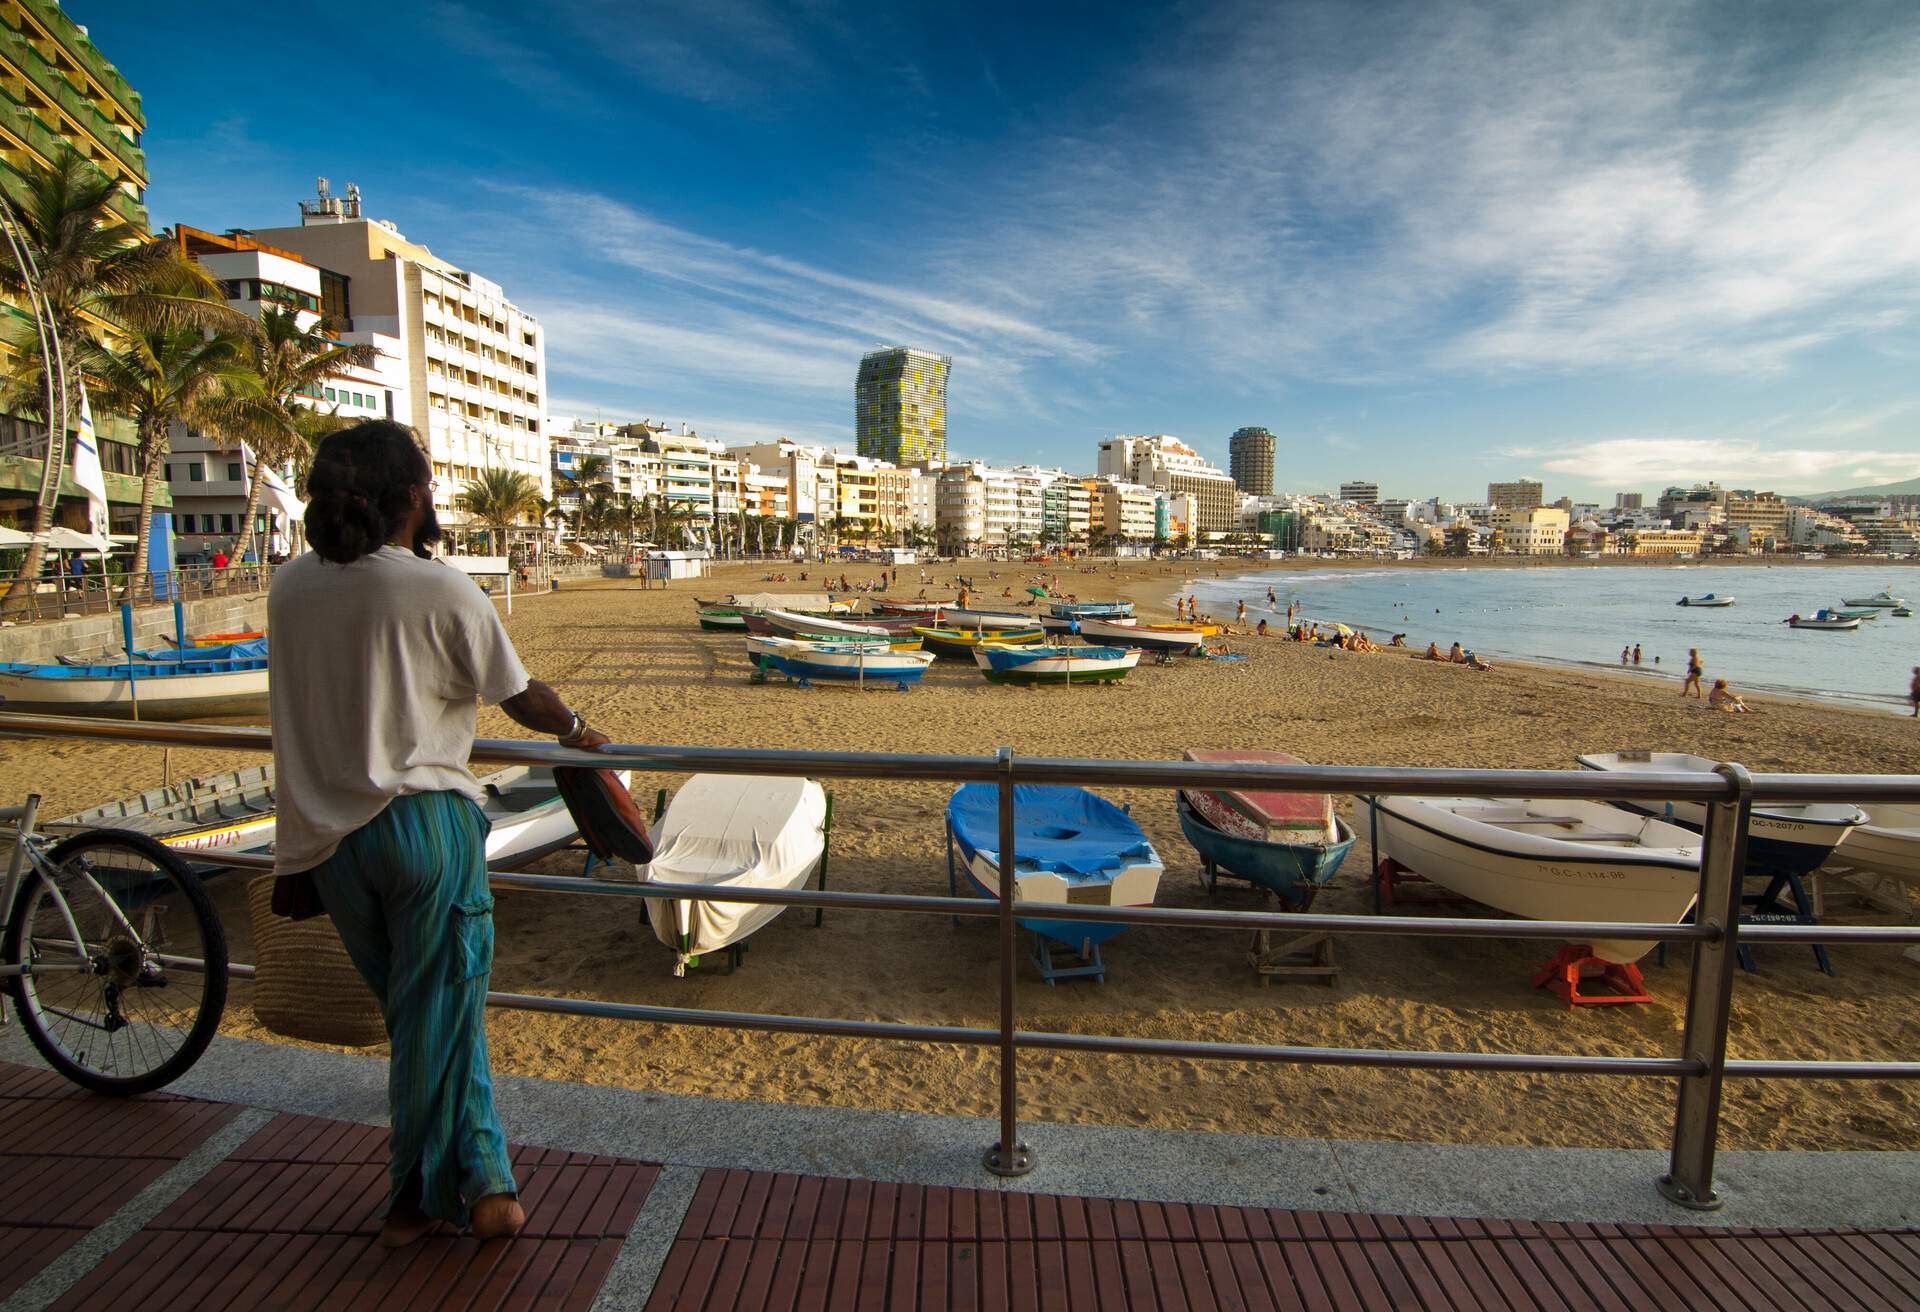 This is a very famous beach located at the city of Gran Canaria, one of the seven canary islands, this beach is called Playa de Las Canteras.